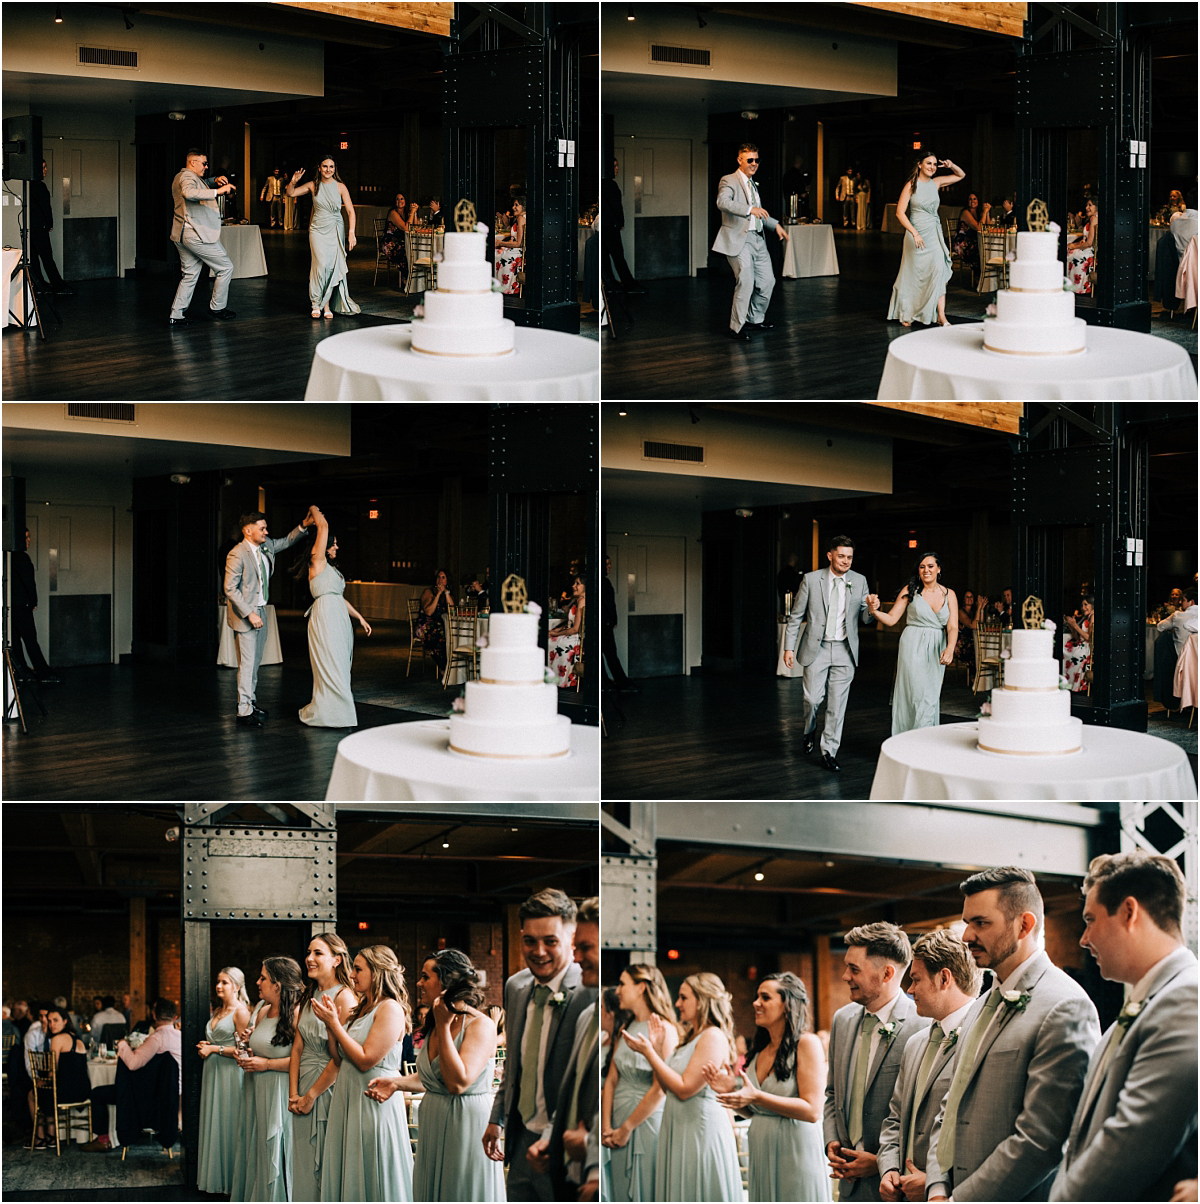 bridal party introduction at wedding reception in cleveland ohio